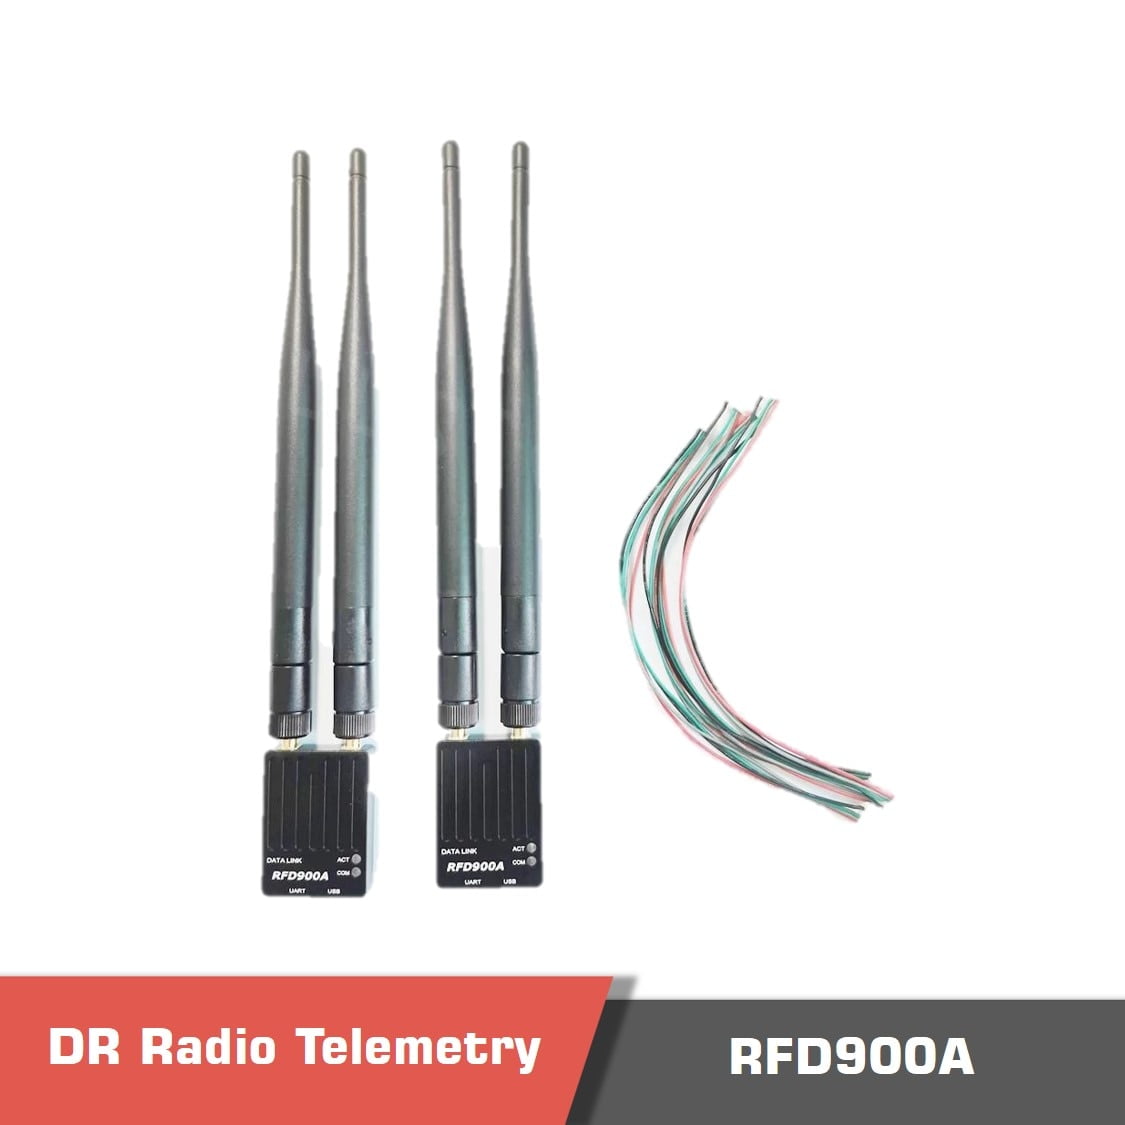 Rfd900a 915mhz 3dr radio telemetry motionew